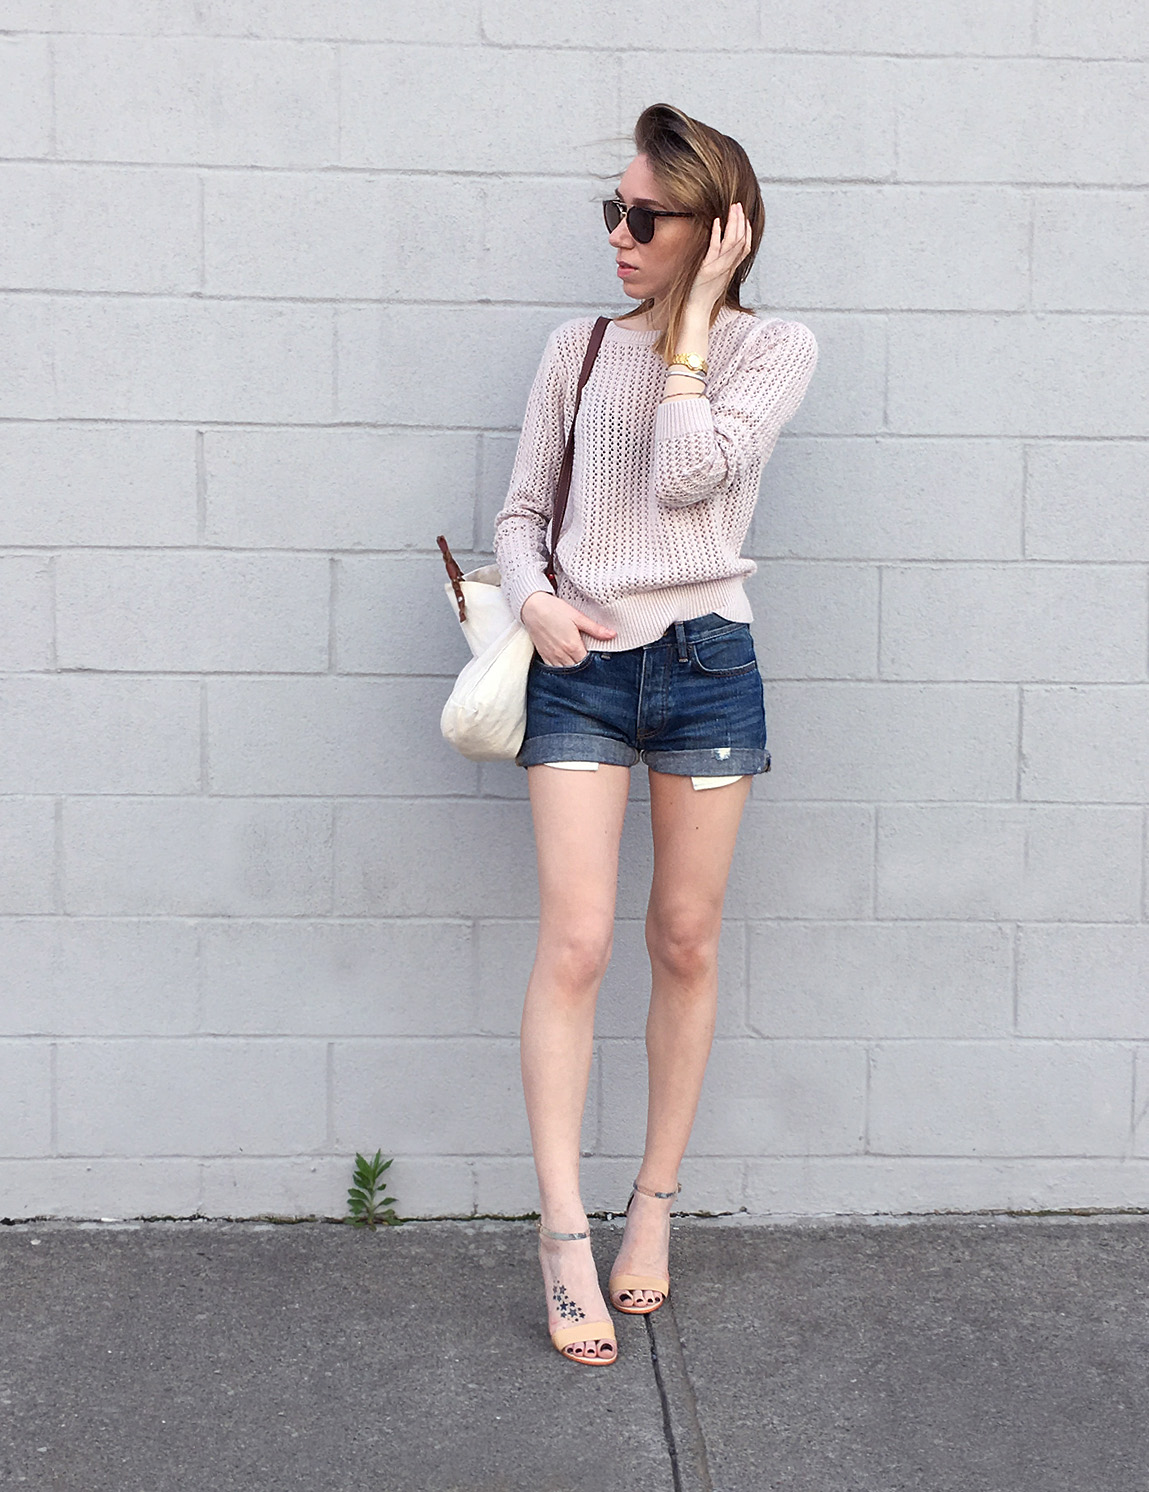 Pink sweater with denim shorts and heels outfit